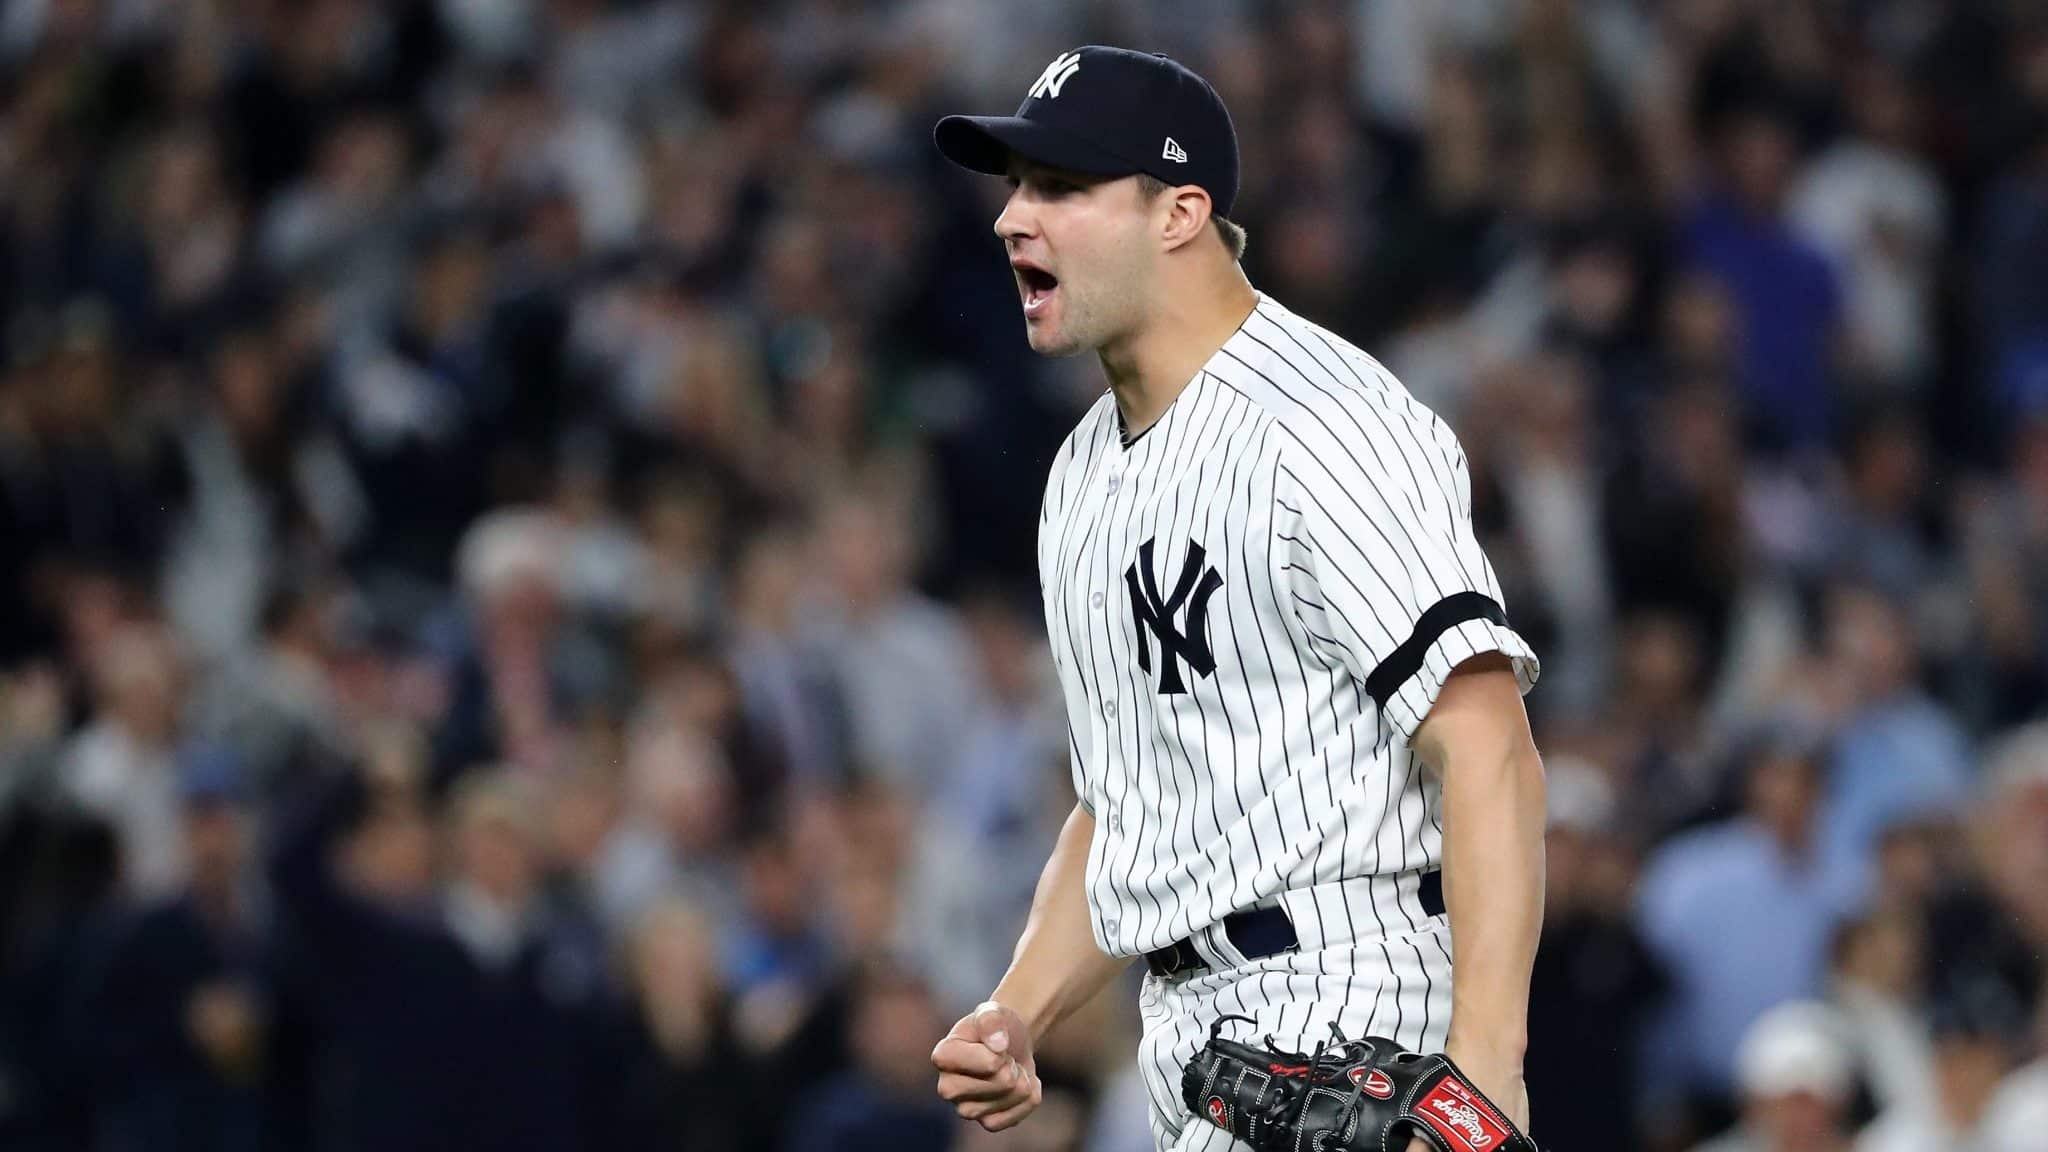 NEW YORK, NY - OCTOBER 18: Tommy Kahnle #48 of the New York Yankees reacts at the end of the top of the eighth inning against the Houston Astros in Game Five of the American League Championship Series at Yankee Stadium on October 18, 2017 in the Bronx borough of New York City.